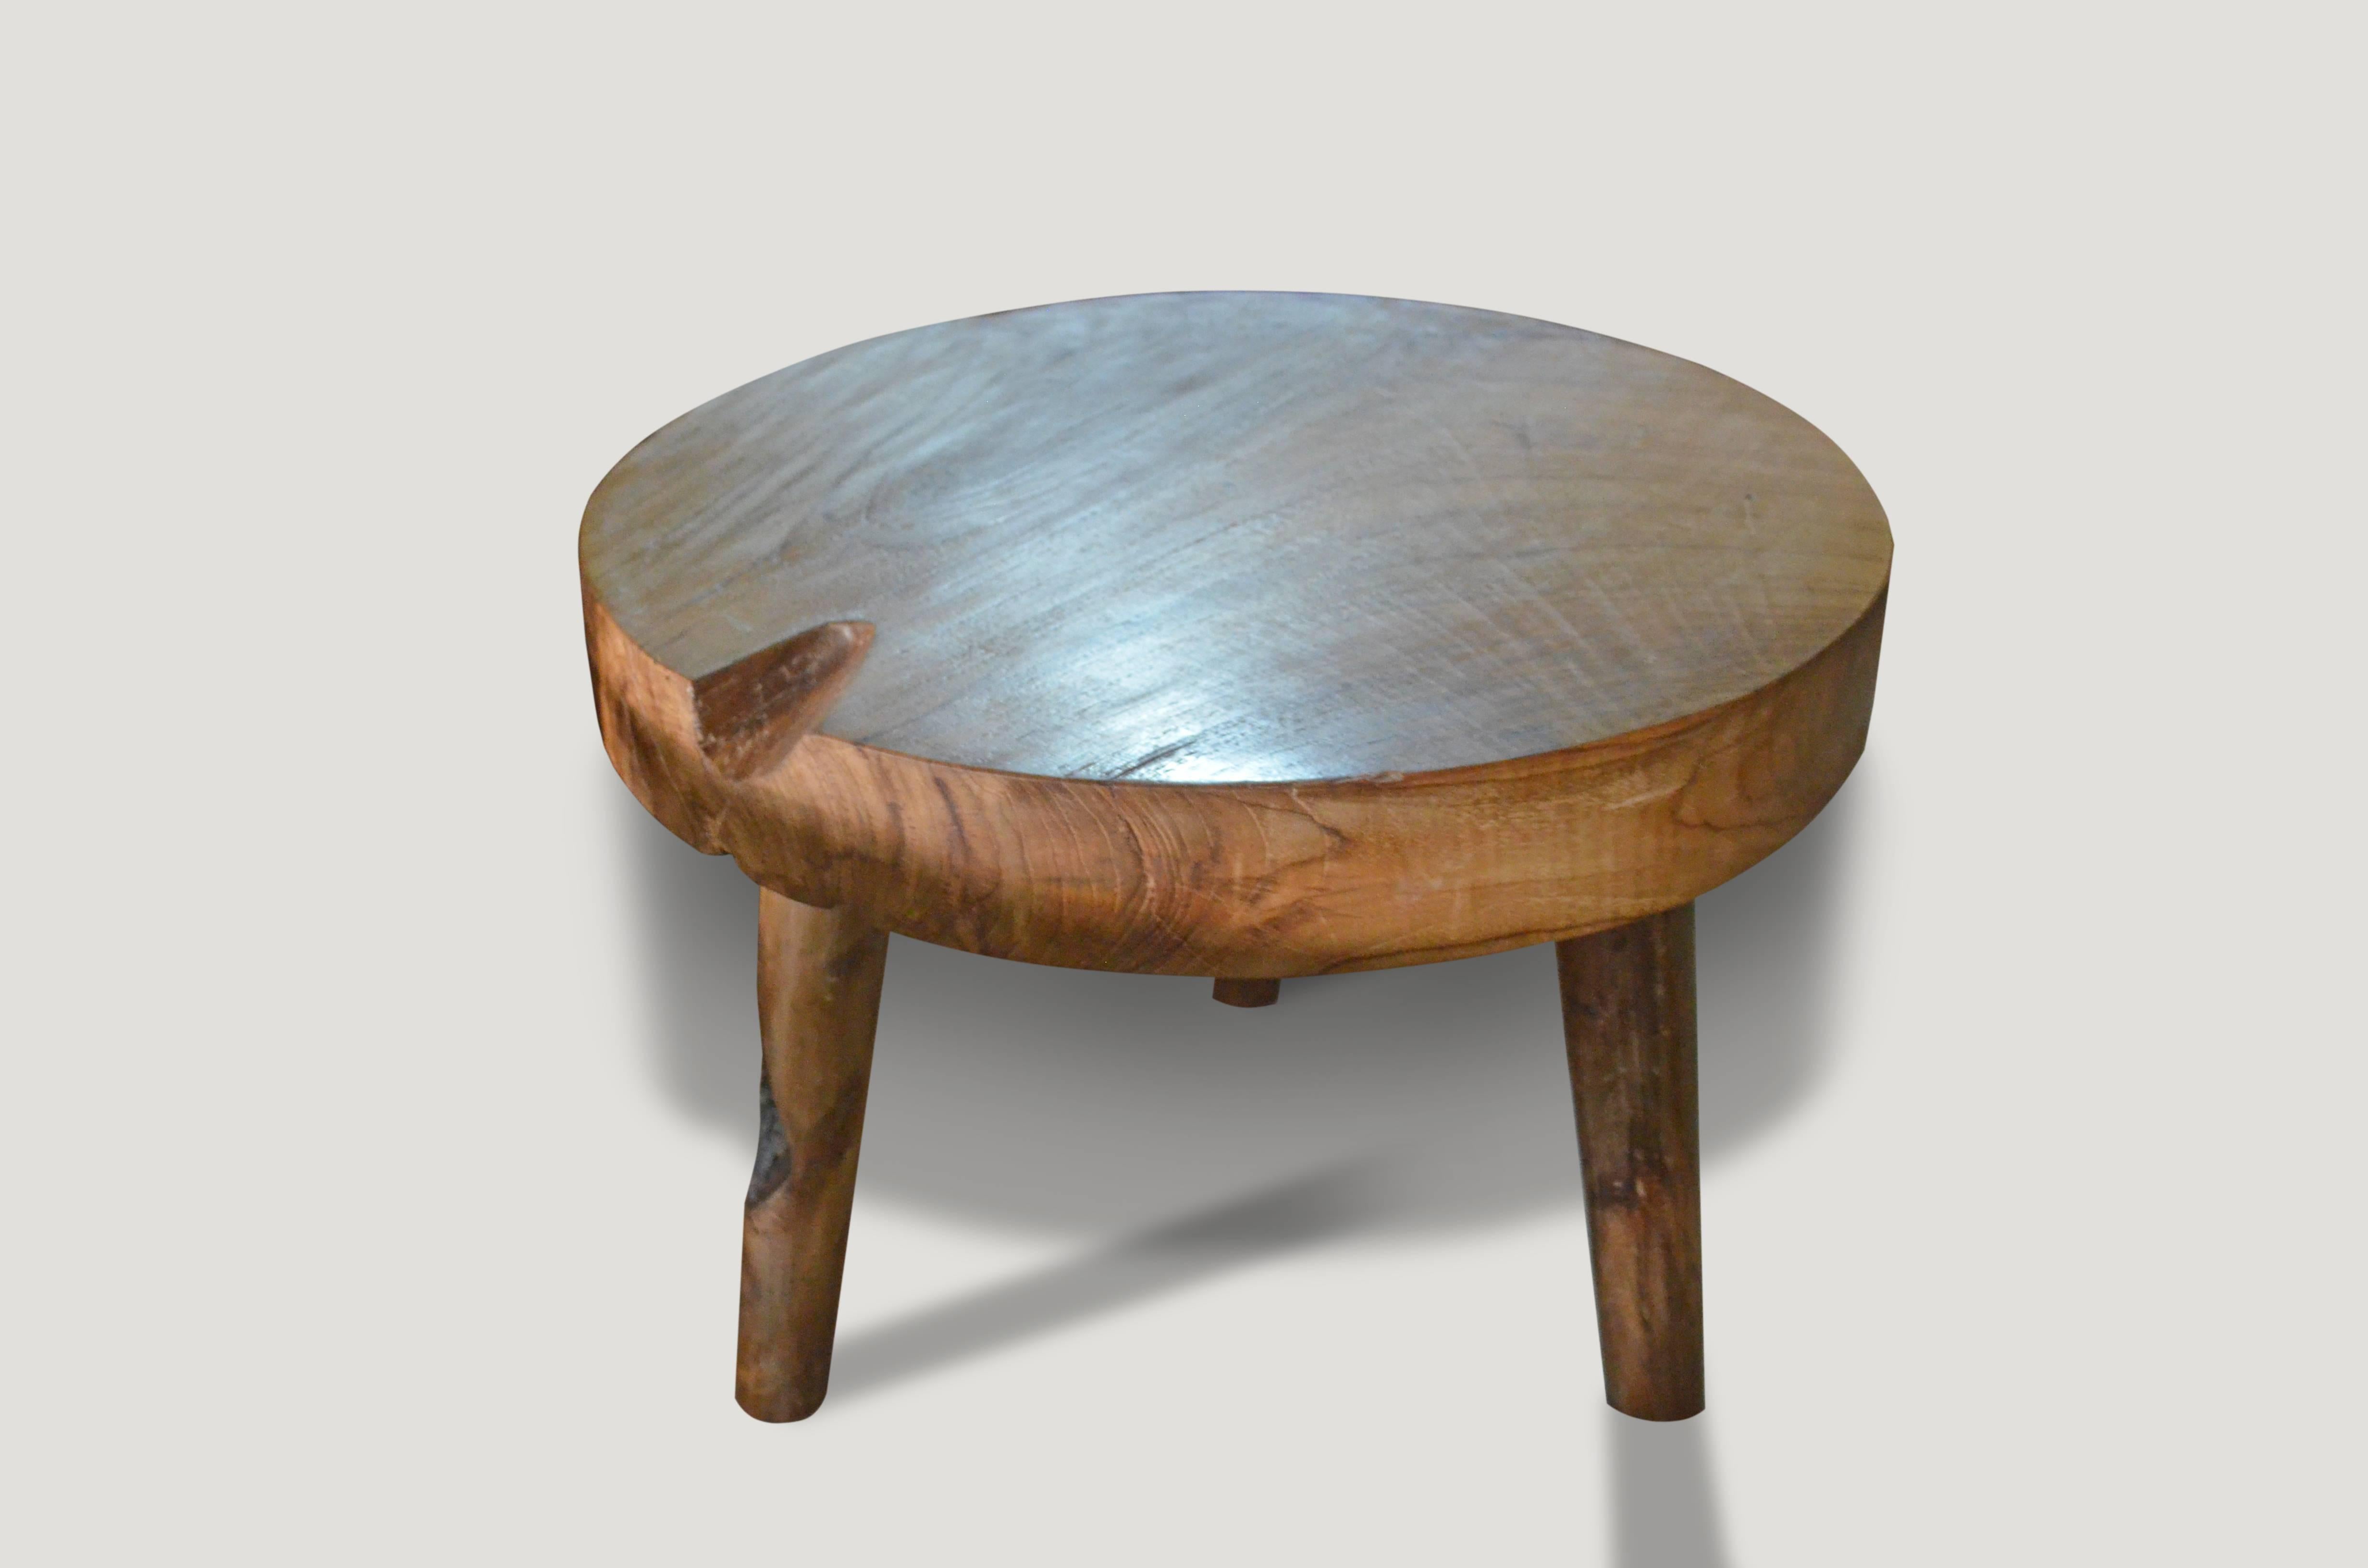 Single slab reclaimed teak wood side table with a natural oil finish. Floating on midcentury style legs. Pair available.

Measures: 22″ dia x 16″ high x 3″ single slab top.

Andrianna Shamaris. The Leader In Modern Organic Design™